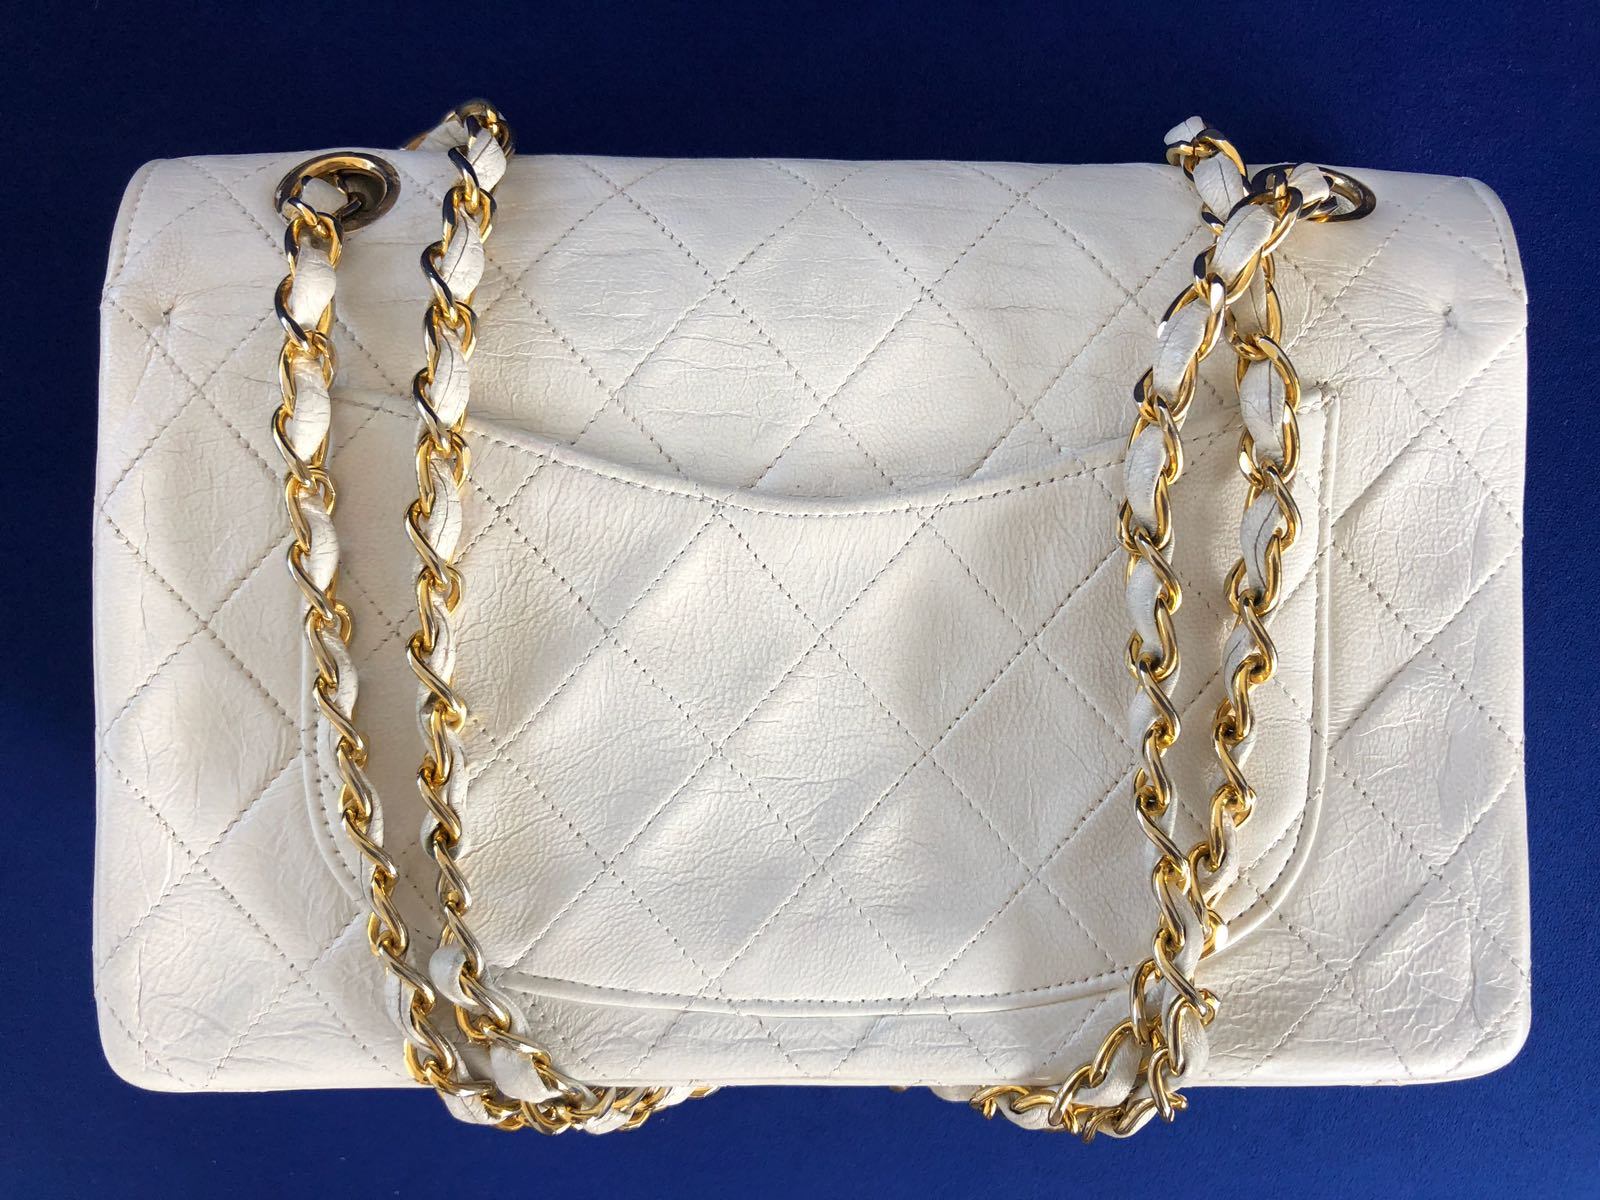 Timeless classique top handle leather bag Chanel White in Leather - 37880415